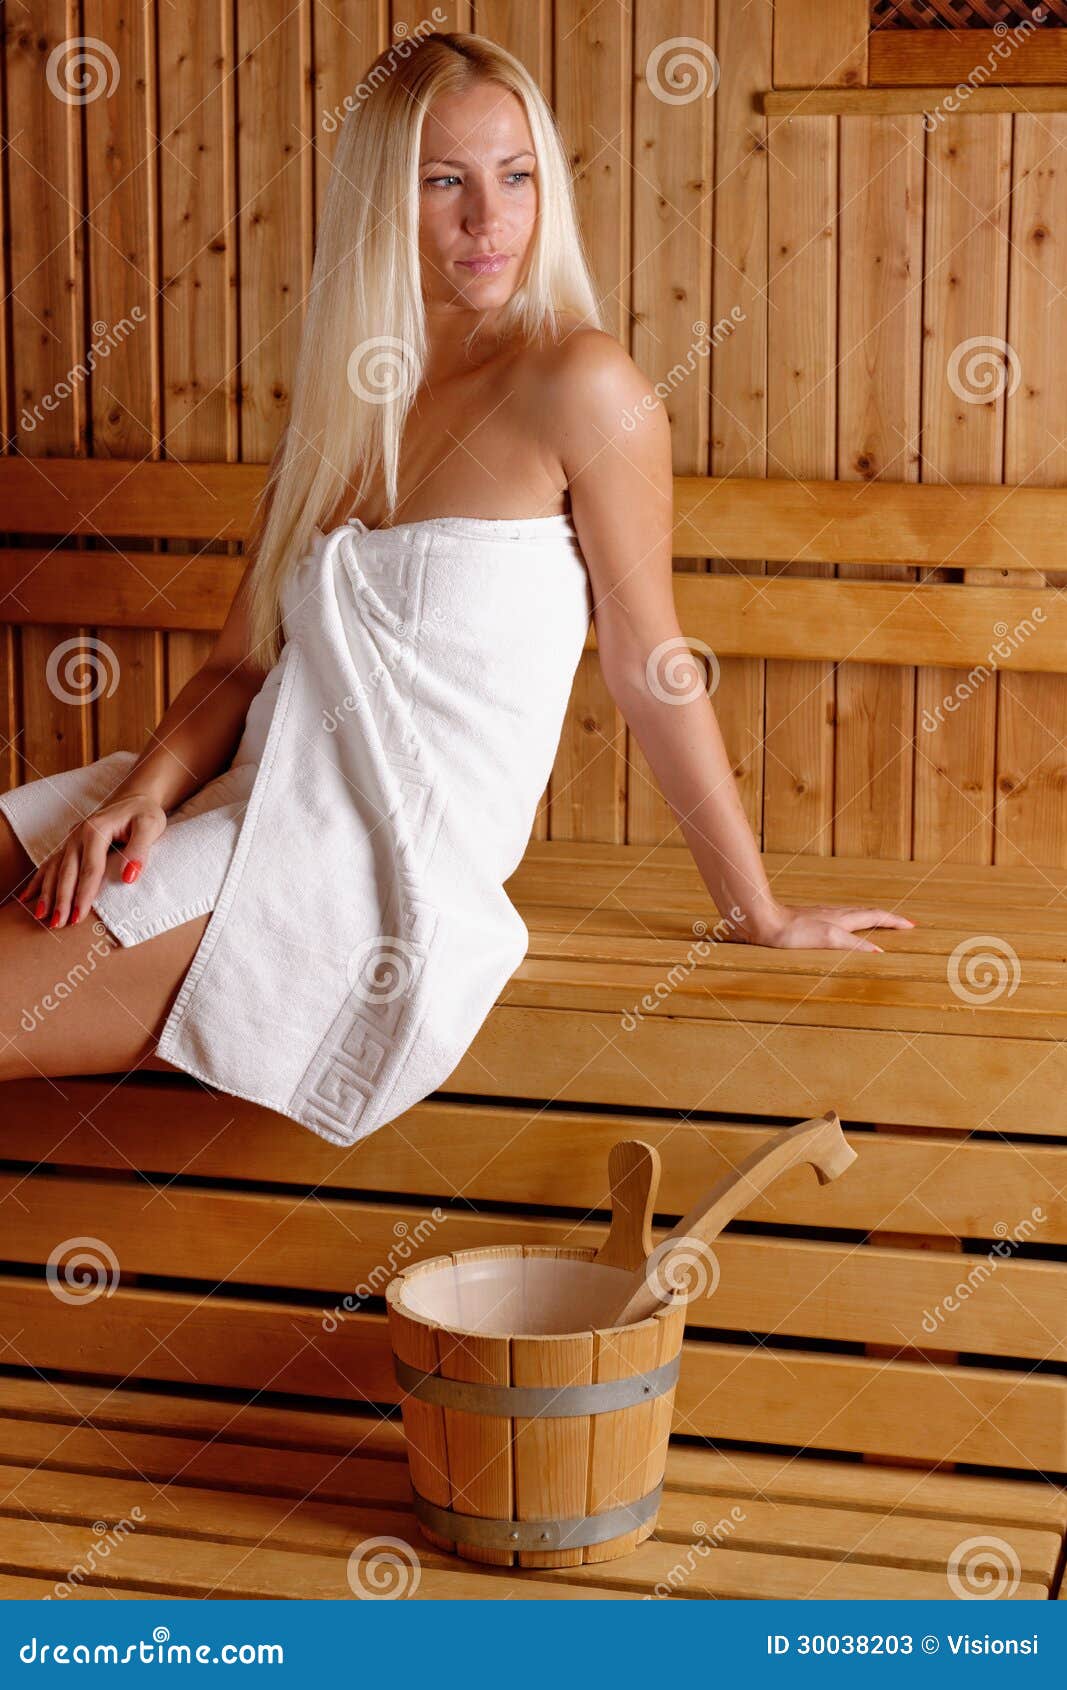 Attractive And Smiling Woman In Towels Looking At Camera In Sauna